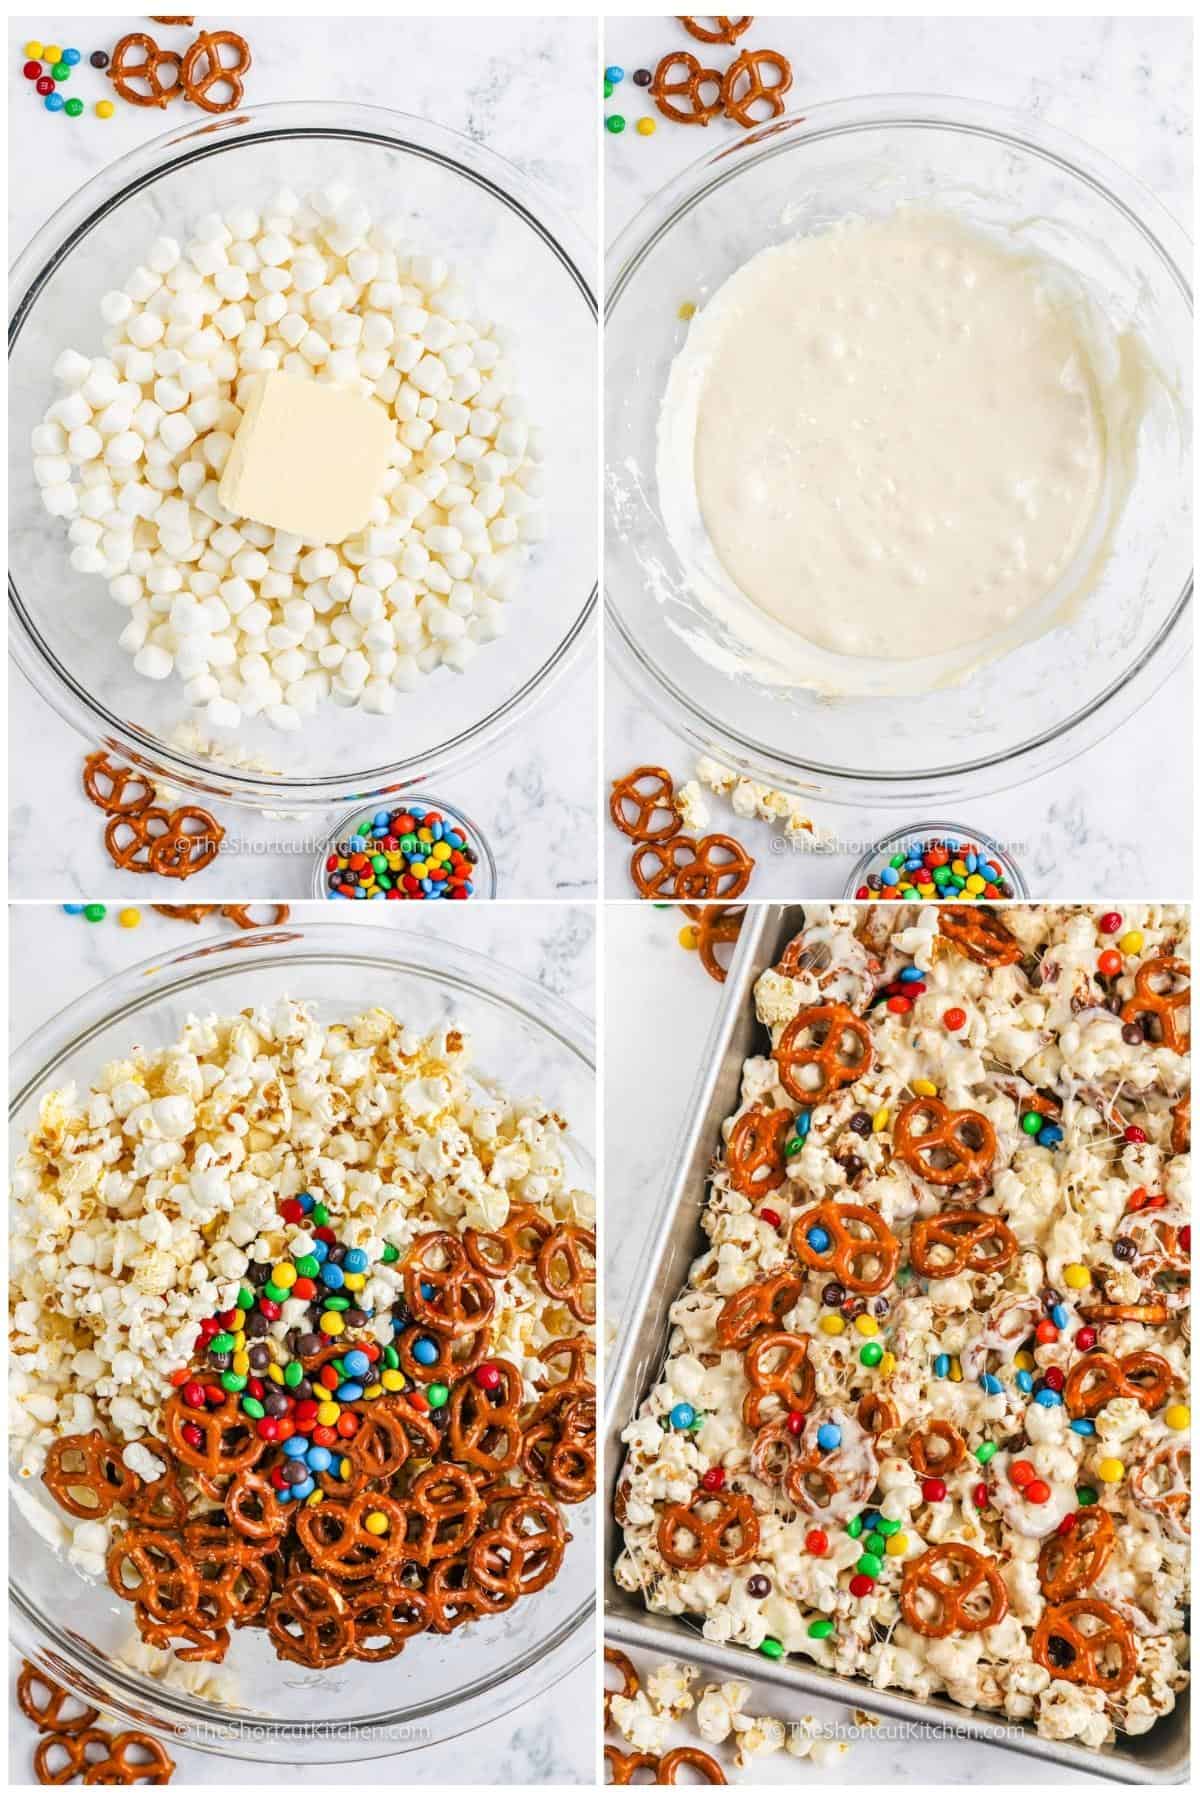 process of adding ingredients together to make Popcorn Bars